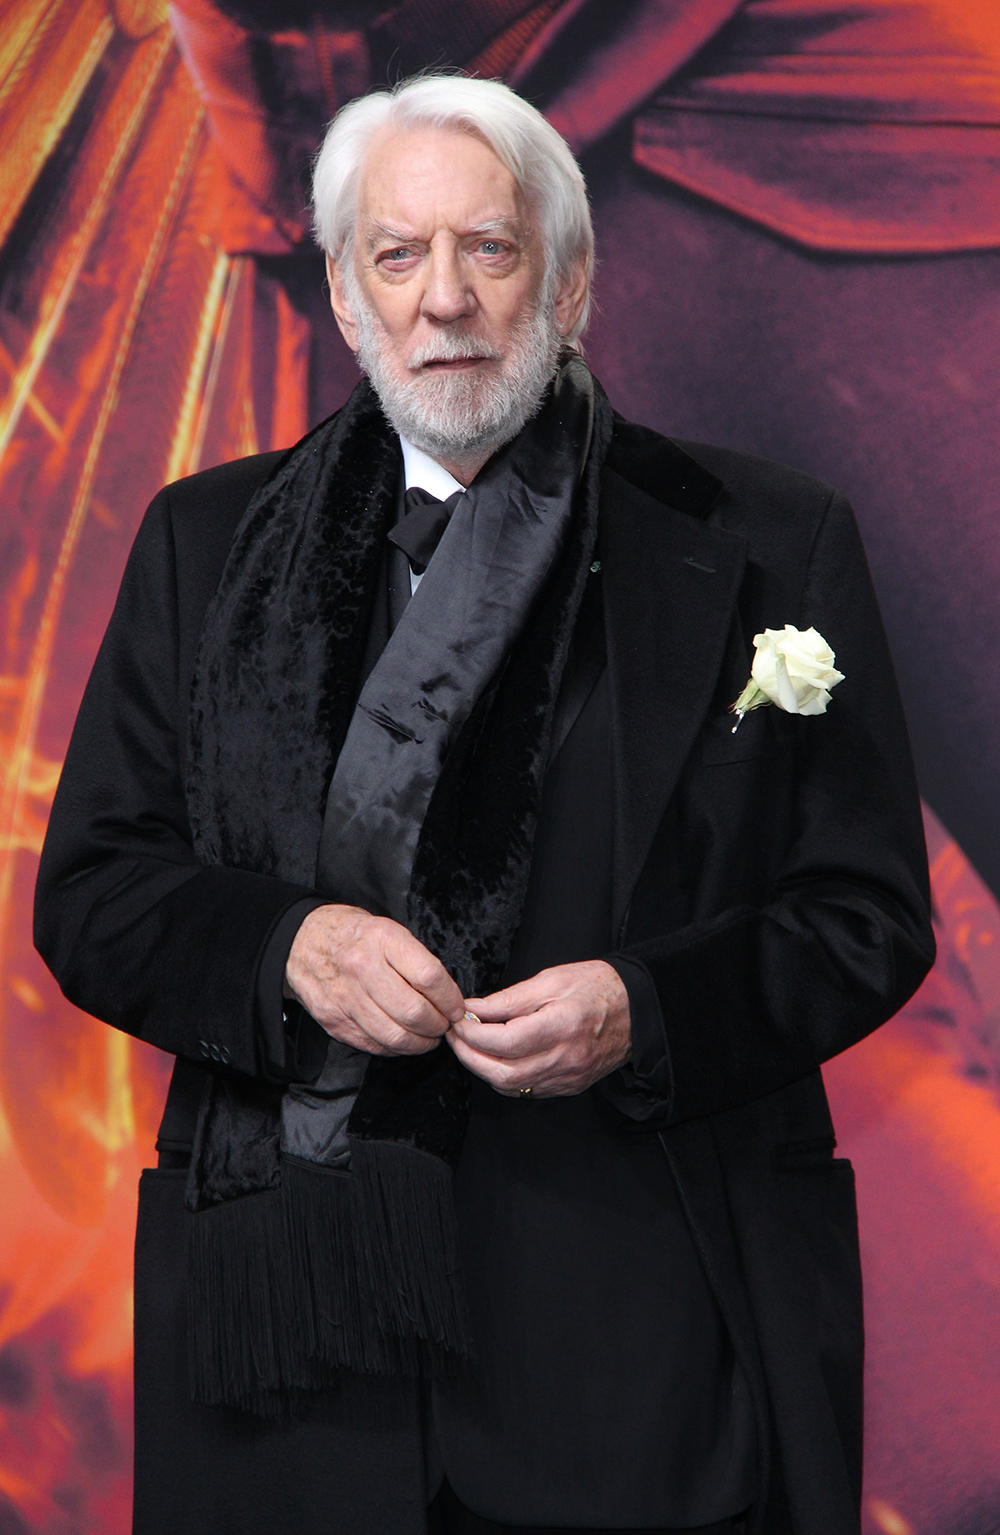 Donald Sutherland at the Berlin premiere.